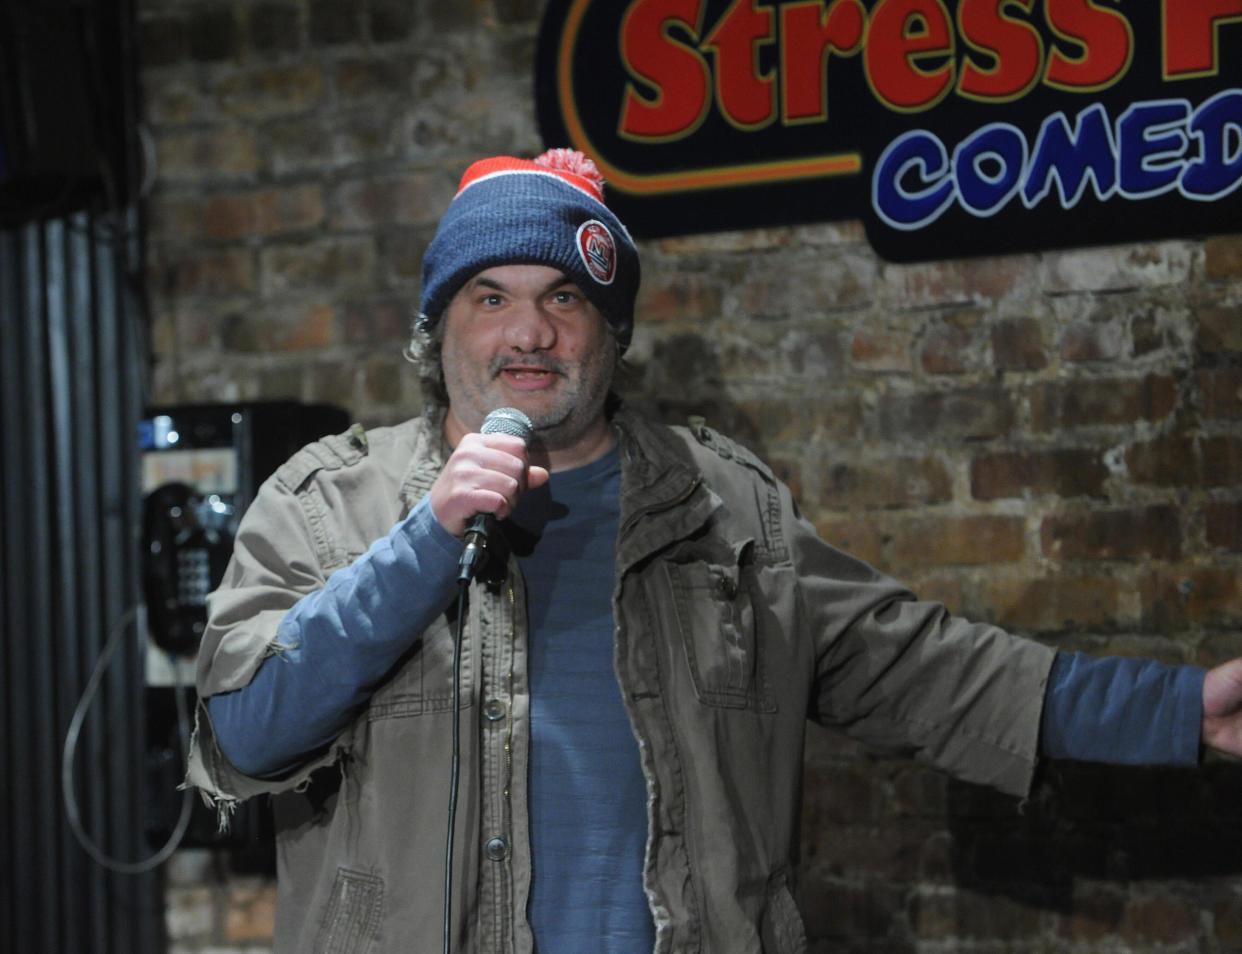 Artie Lange performs at The Stress Factory Comedy Club on Nov. 21, 2018 in New Brunswick, New Jersey. (Photo: Bobby Bank/Getty Images)